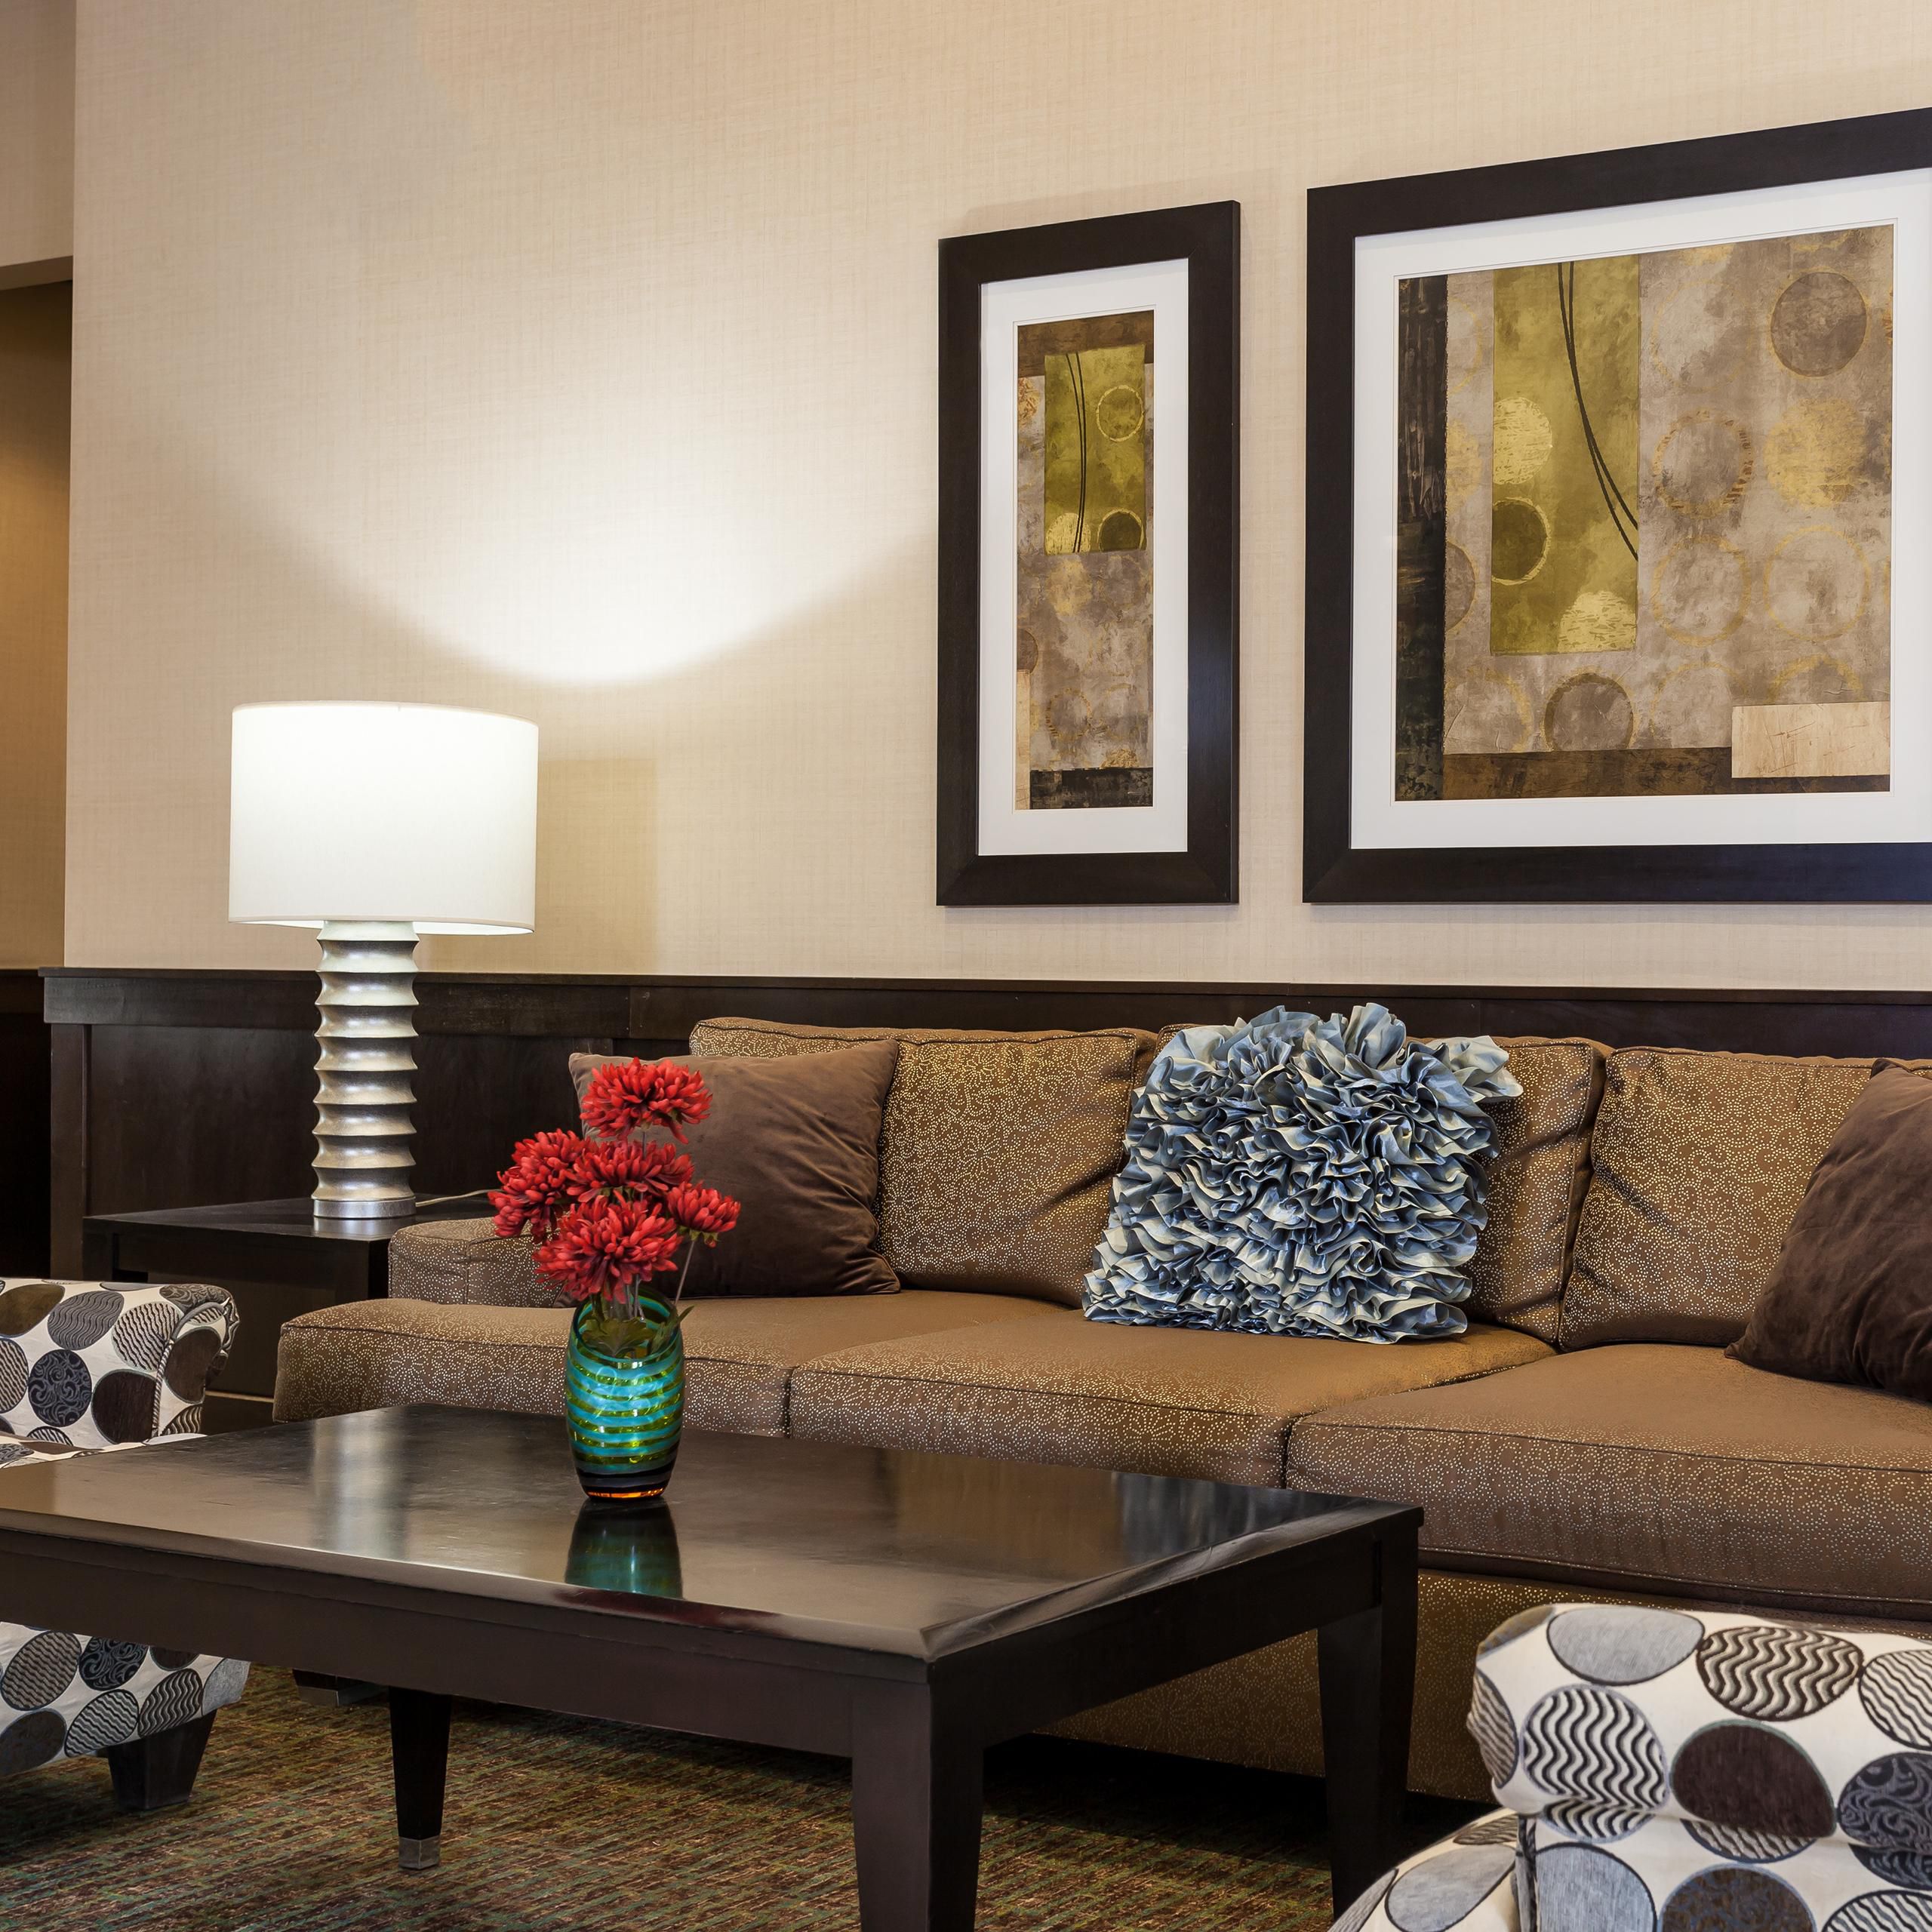 Relax with friends in our comfortable lobby